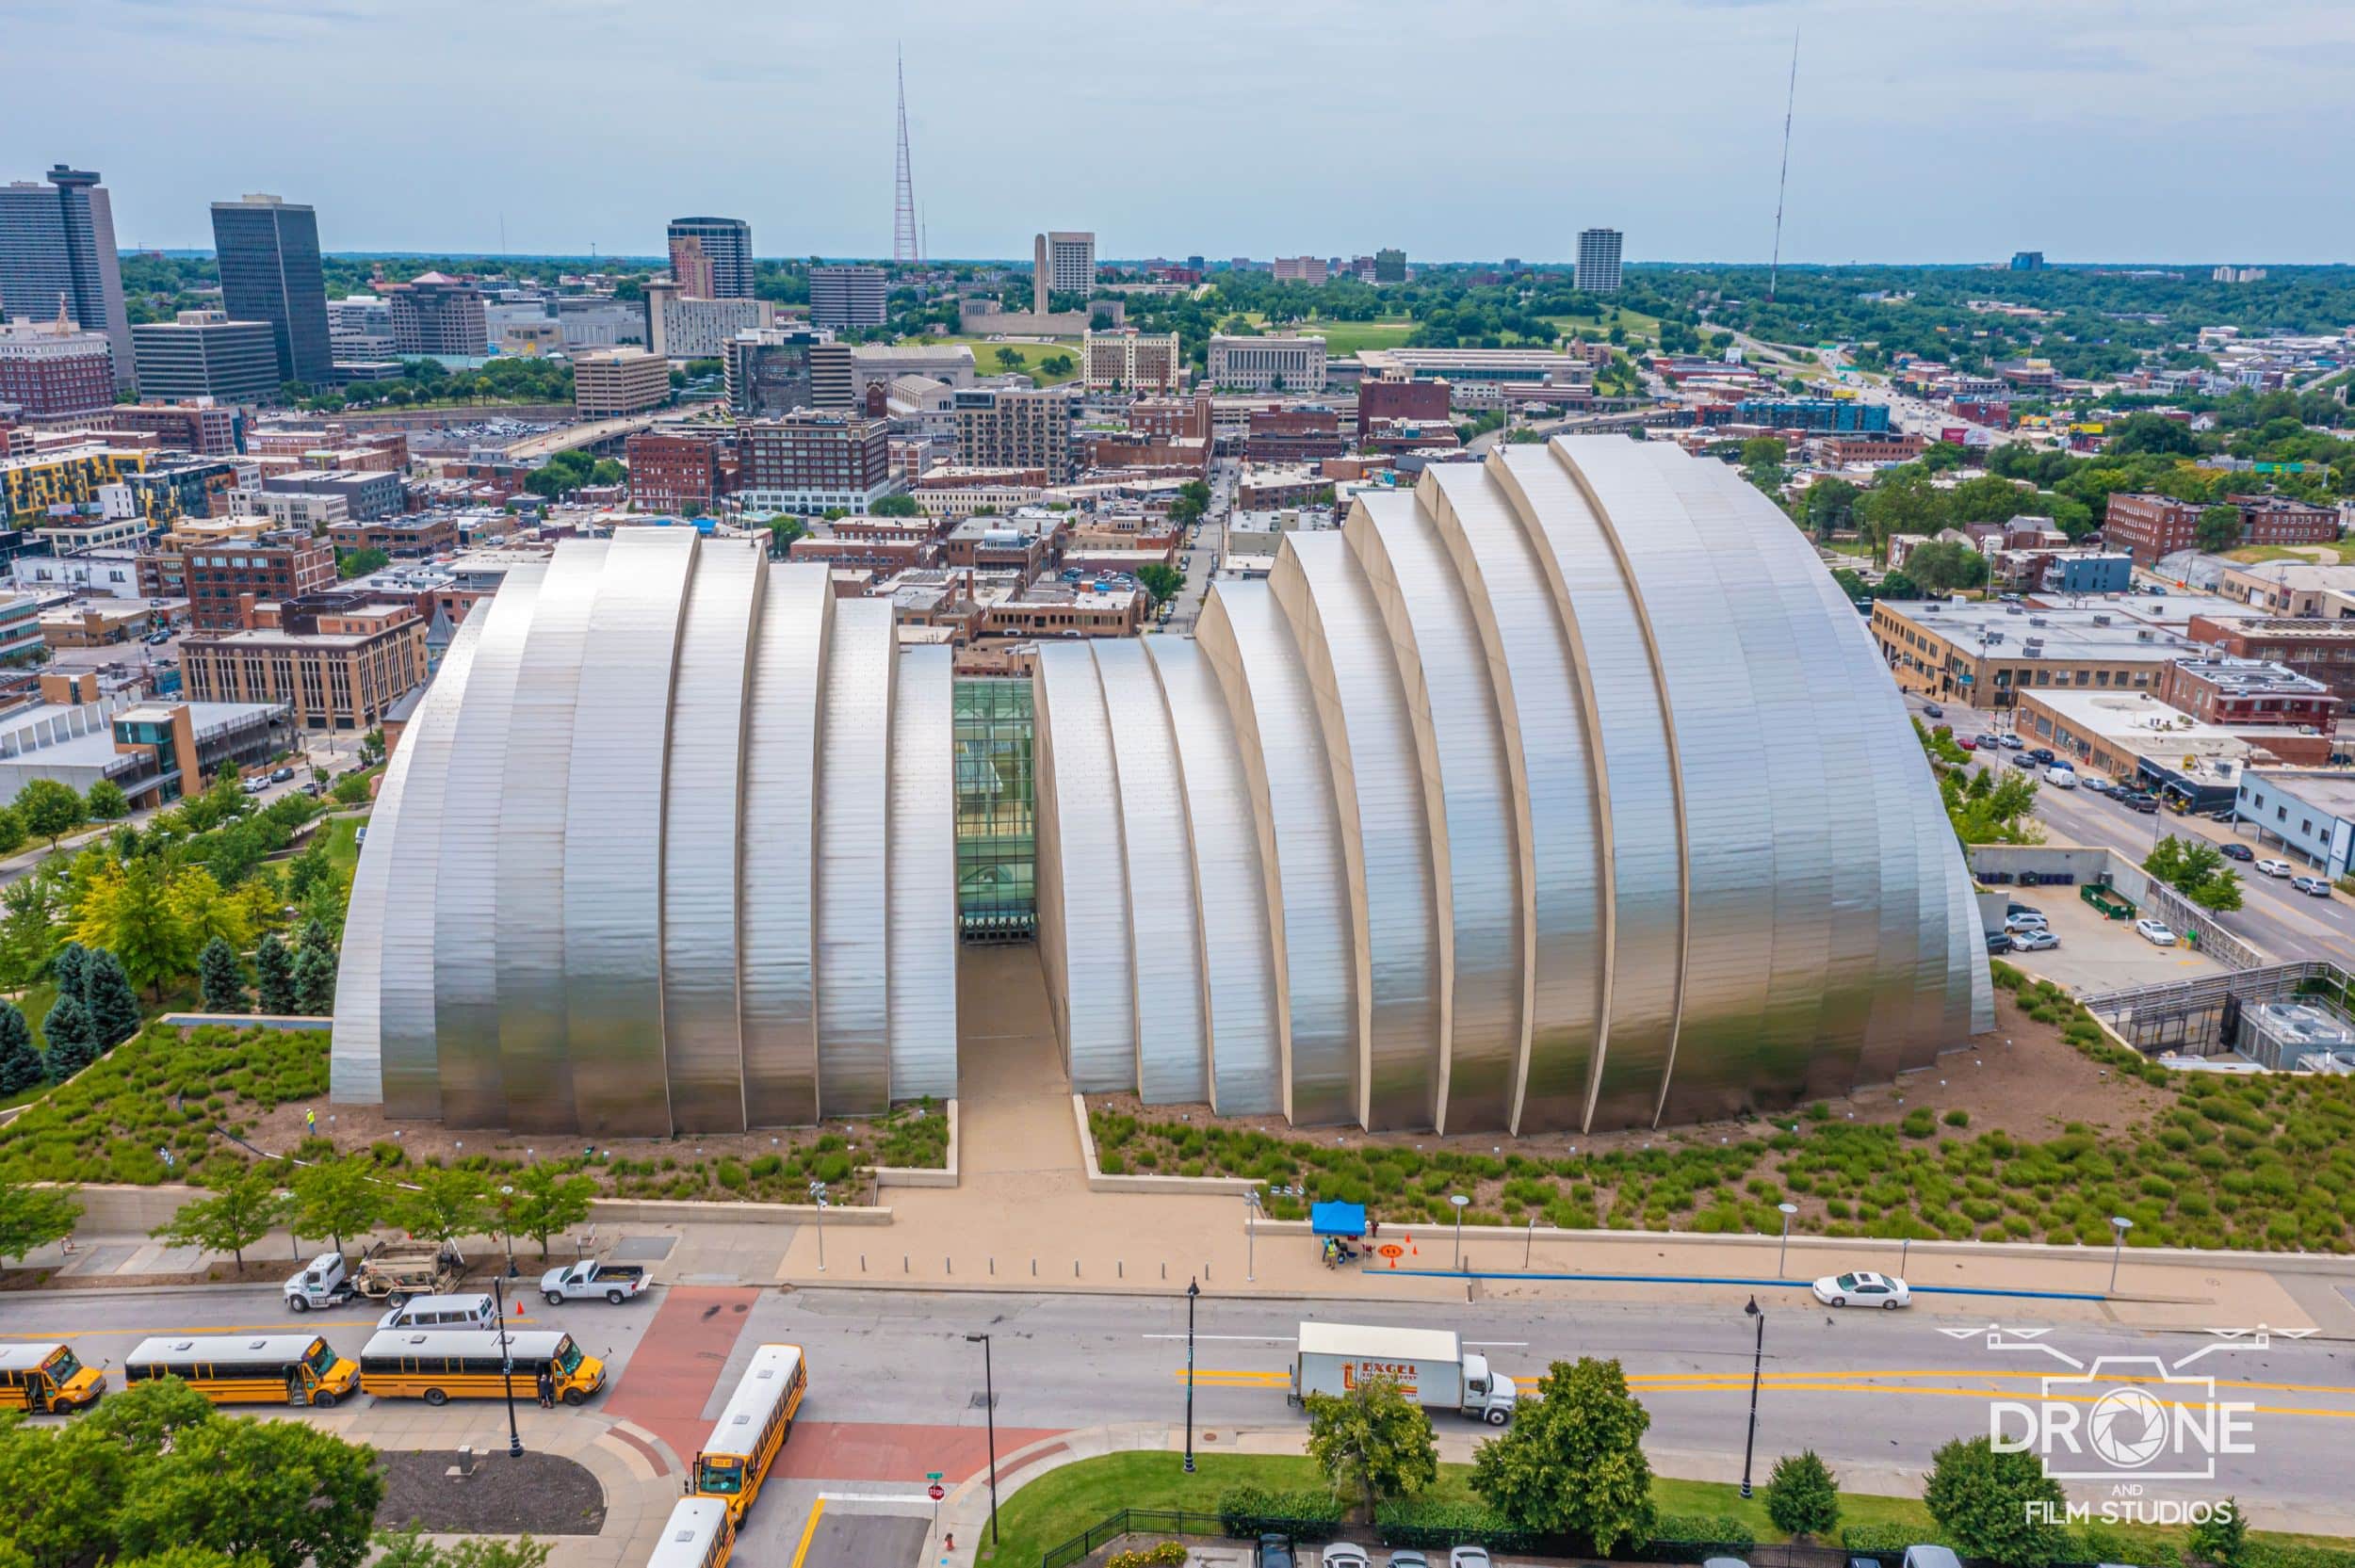 KAUFFMAN CENTER FOR THE PERFORMING ARTS.